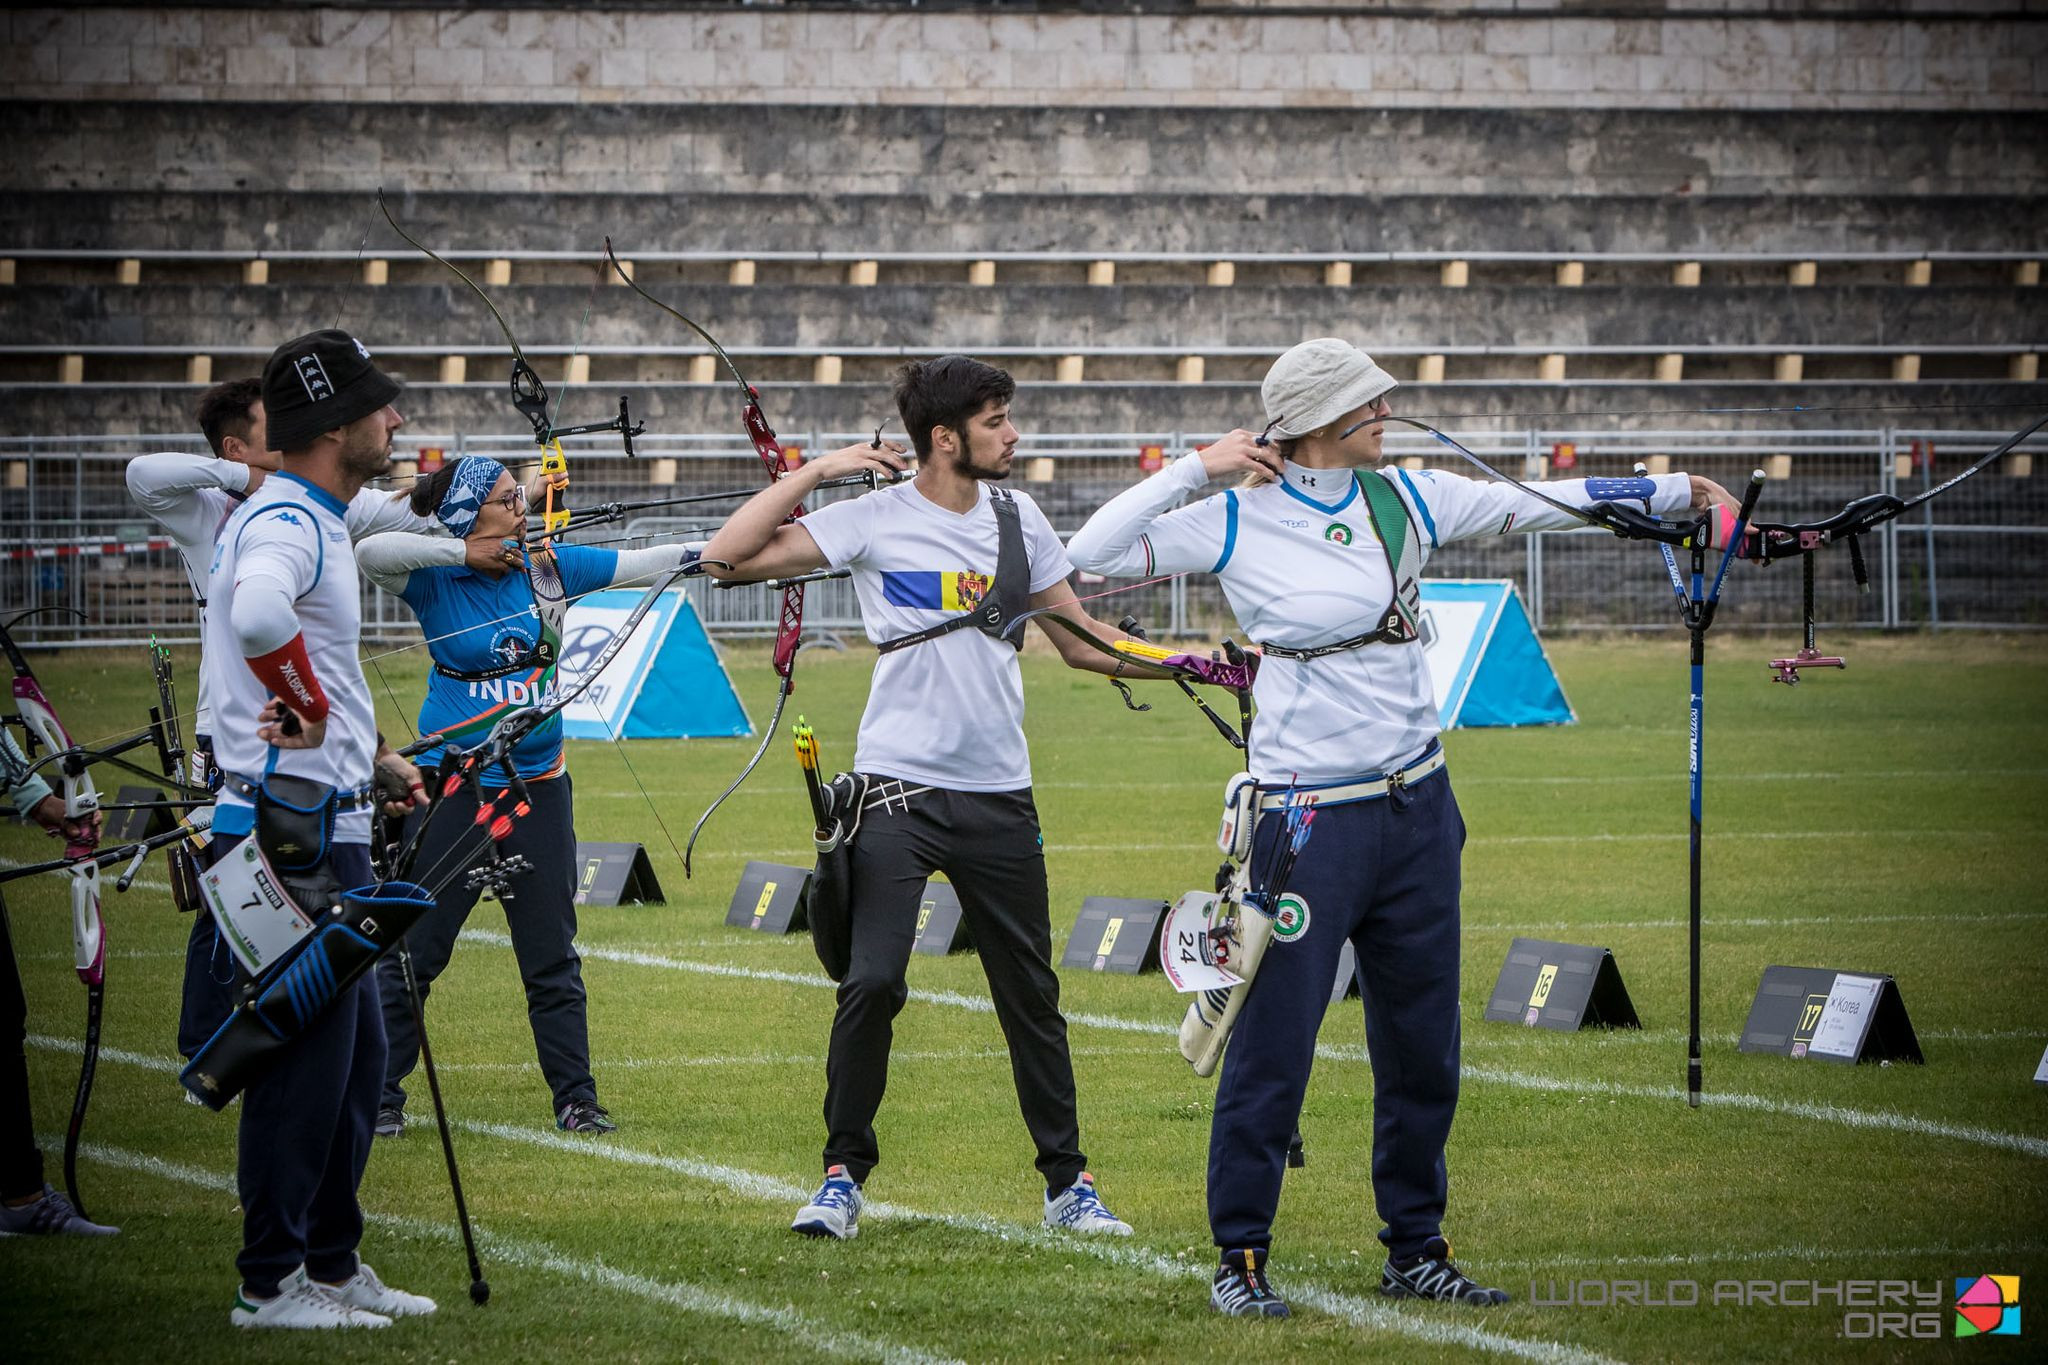  Moldova pair earn their country first gold medal match at Archery World Cup in Berlin